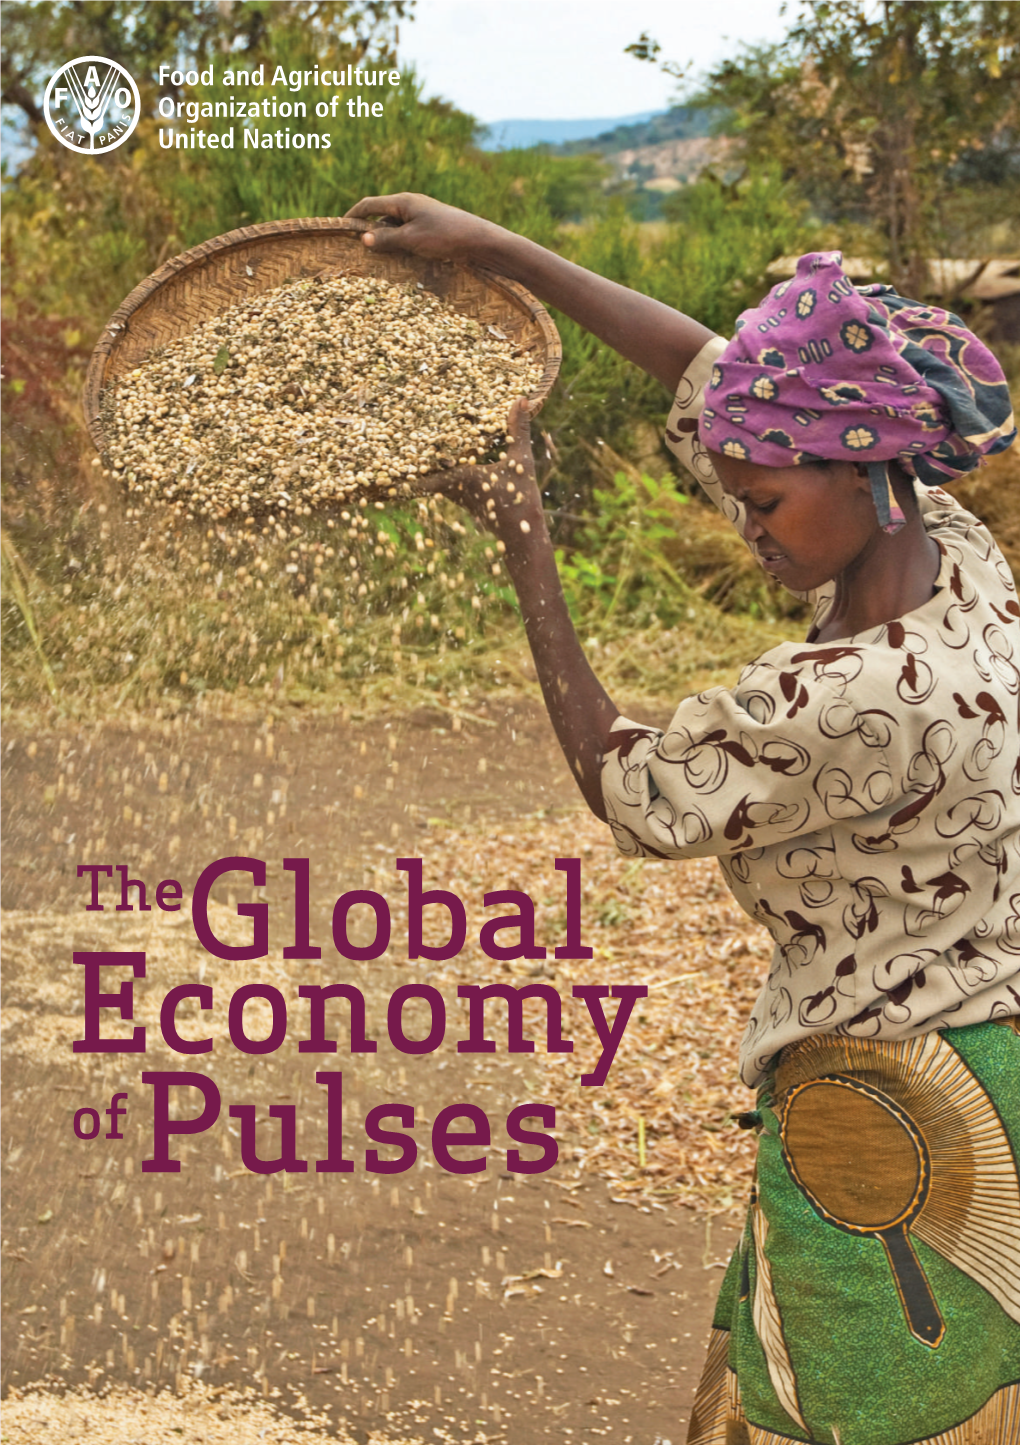 The Global Economy of Pulses